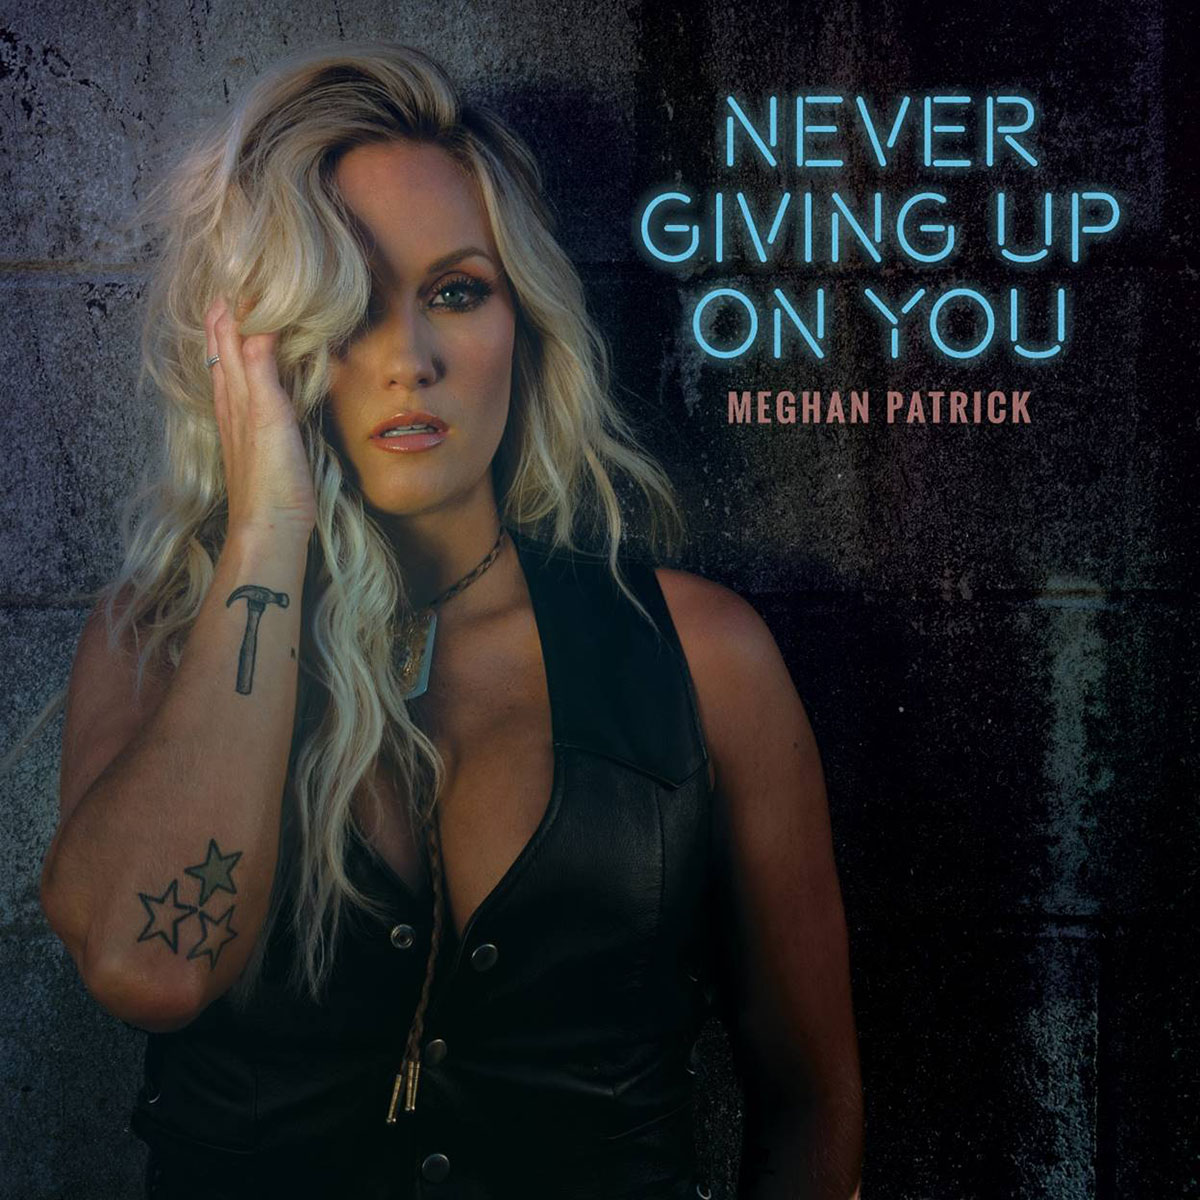 Meghan Patrick - Never Giving Up On You